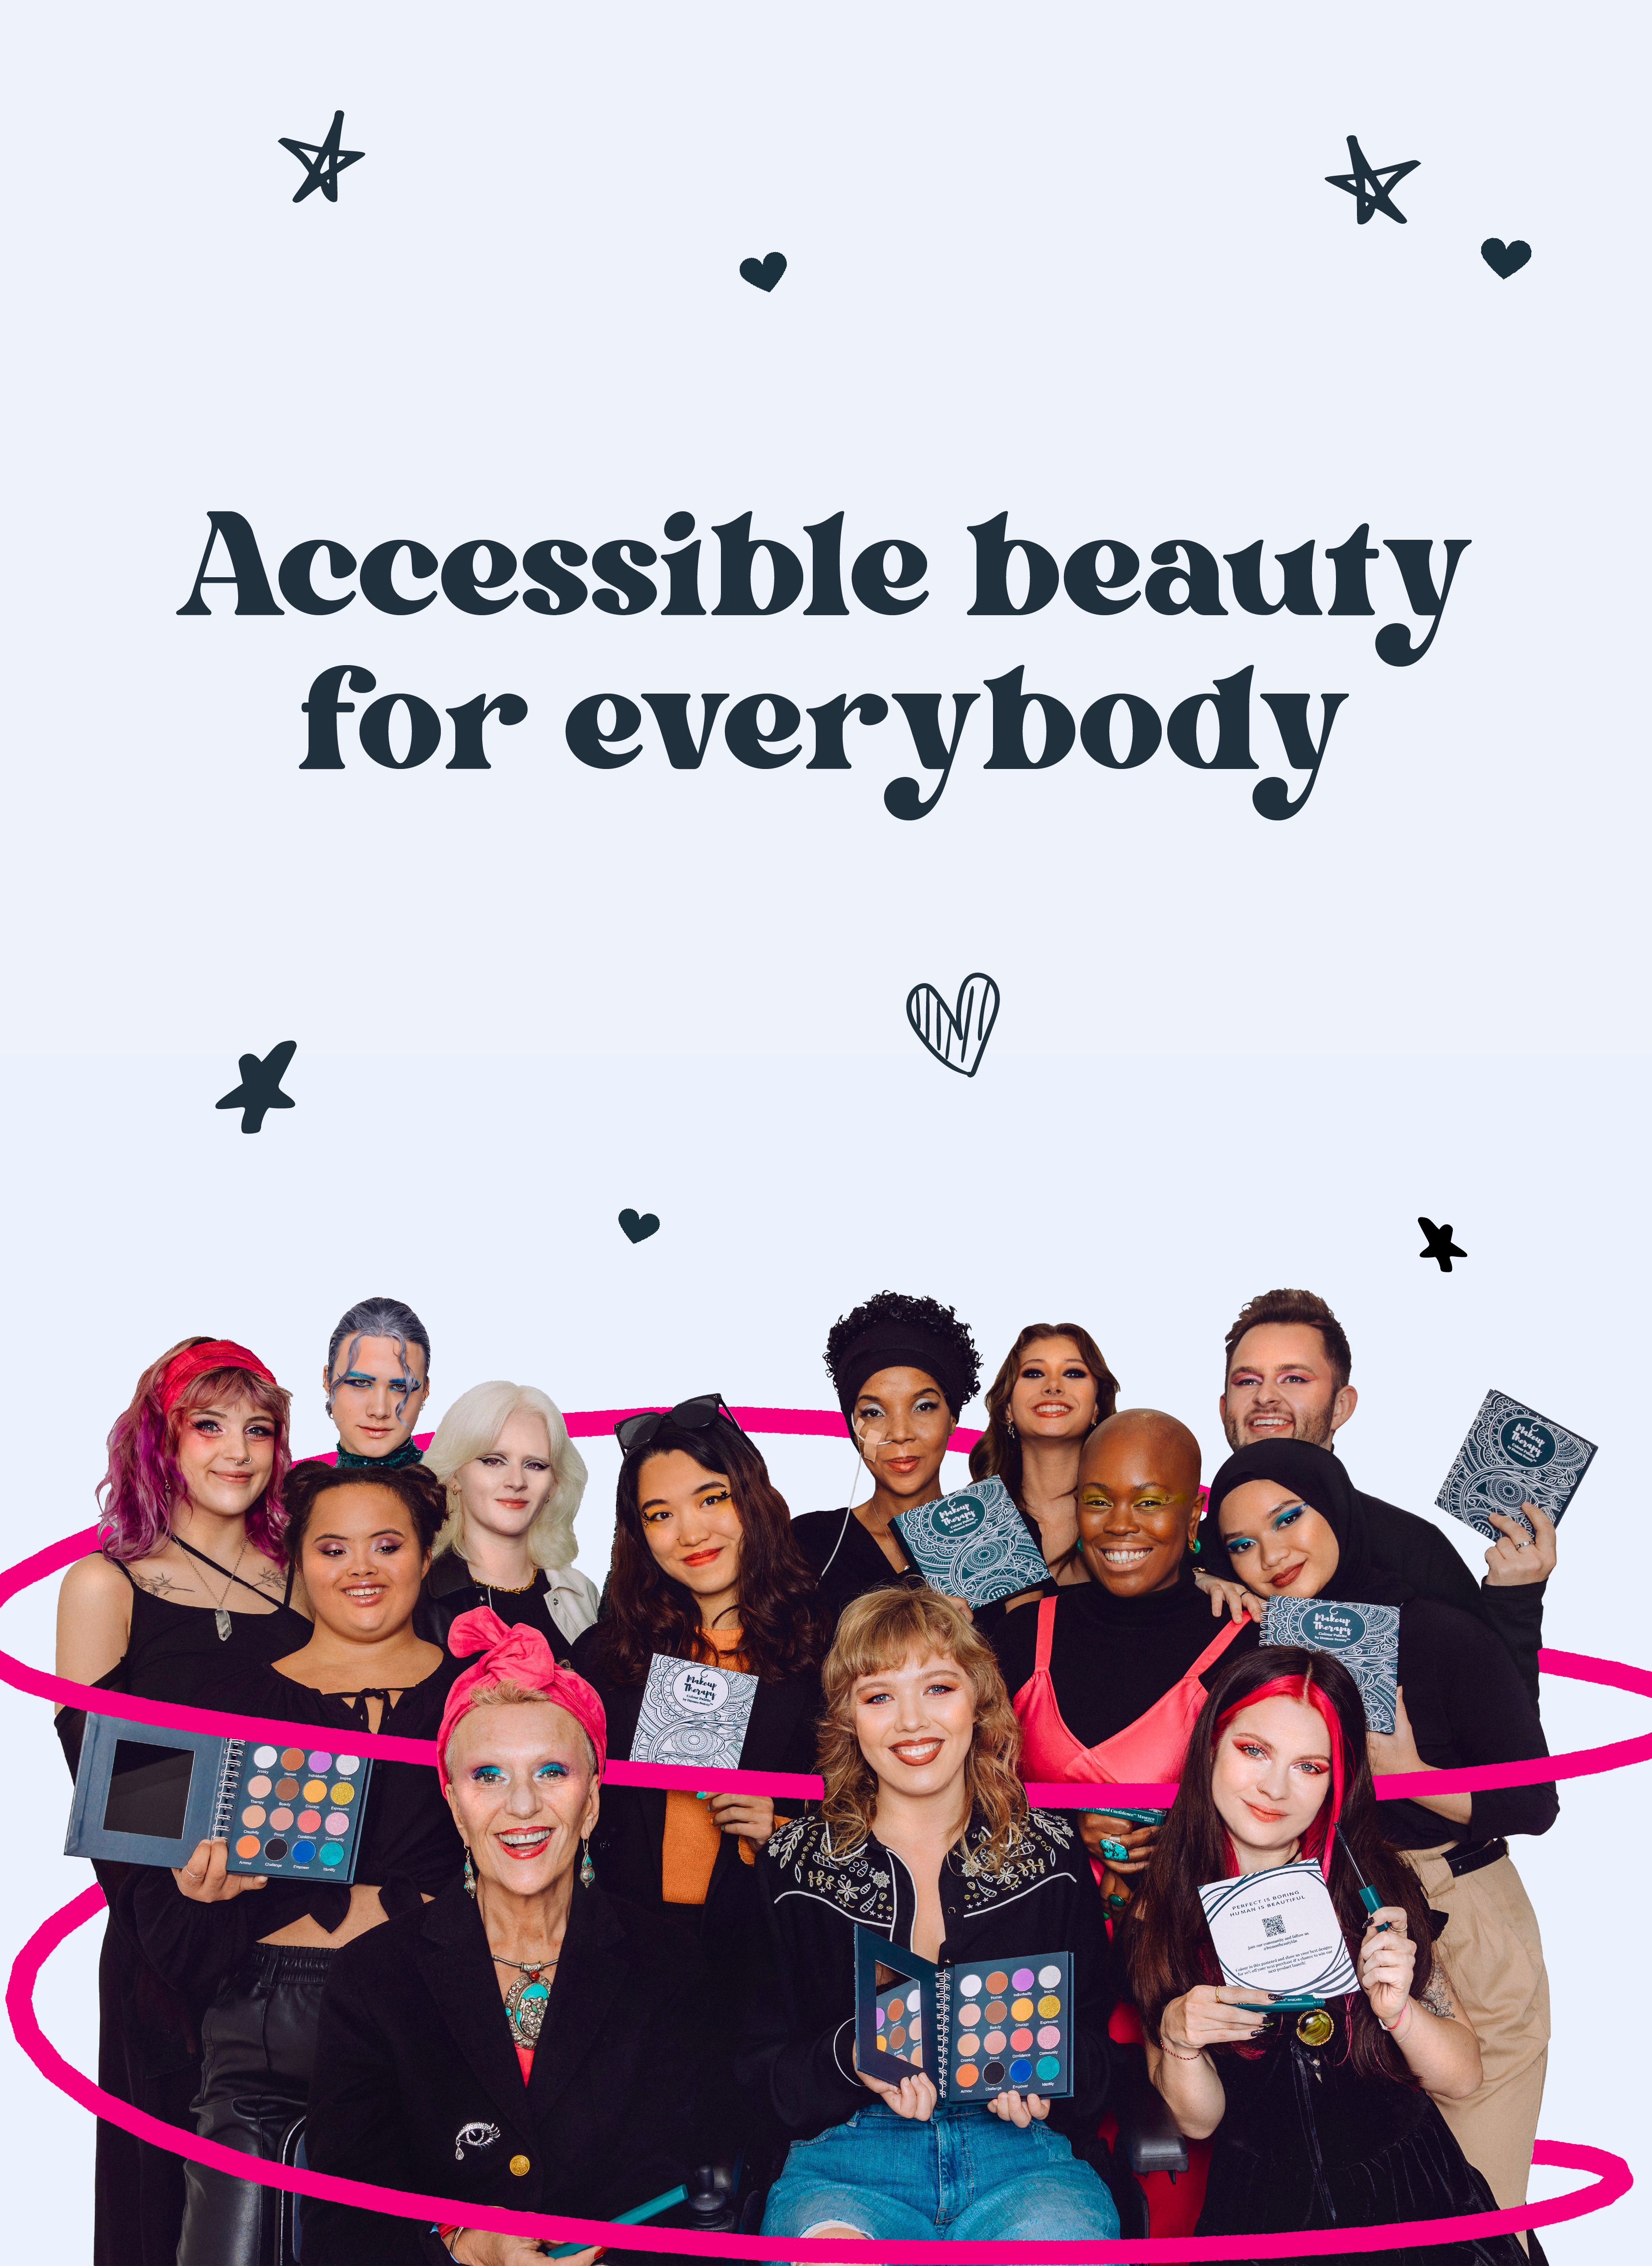 Large visual of all the Human Beauty models gathered together on a light blue background. A text reads "Accessible Beauty for everybody".